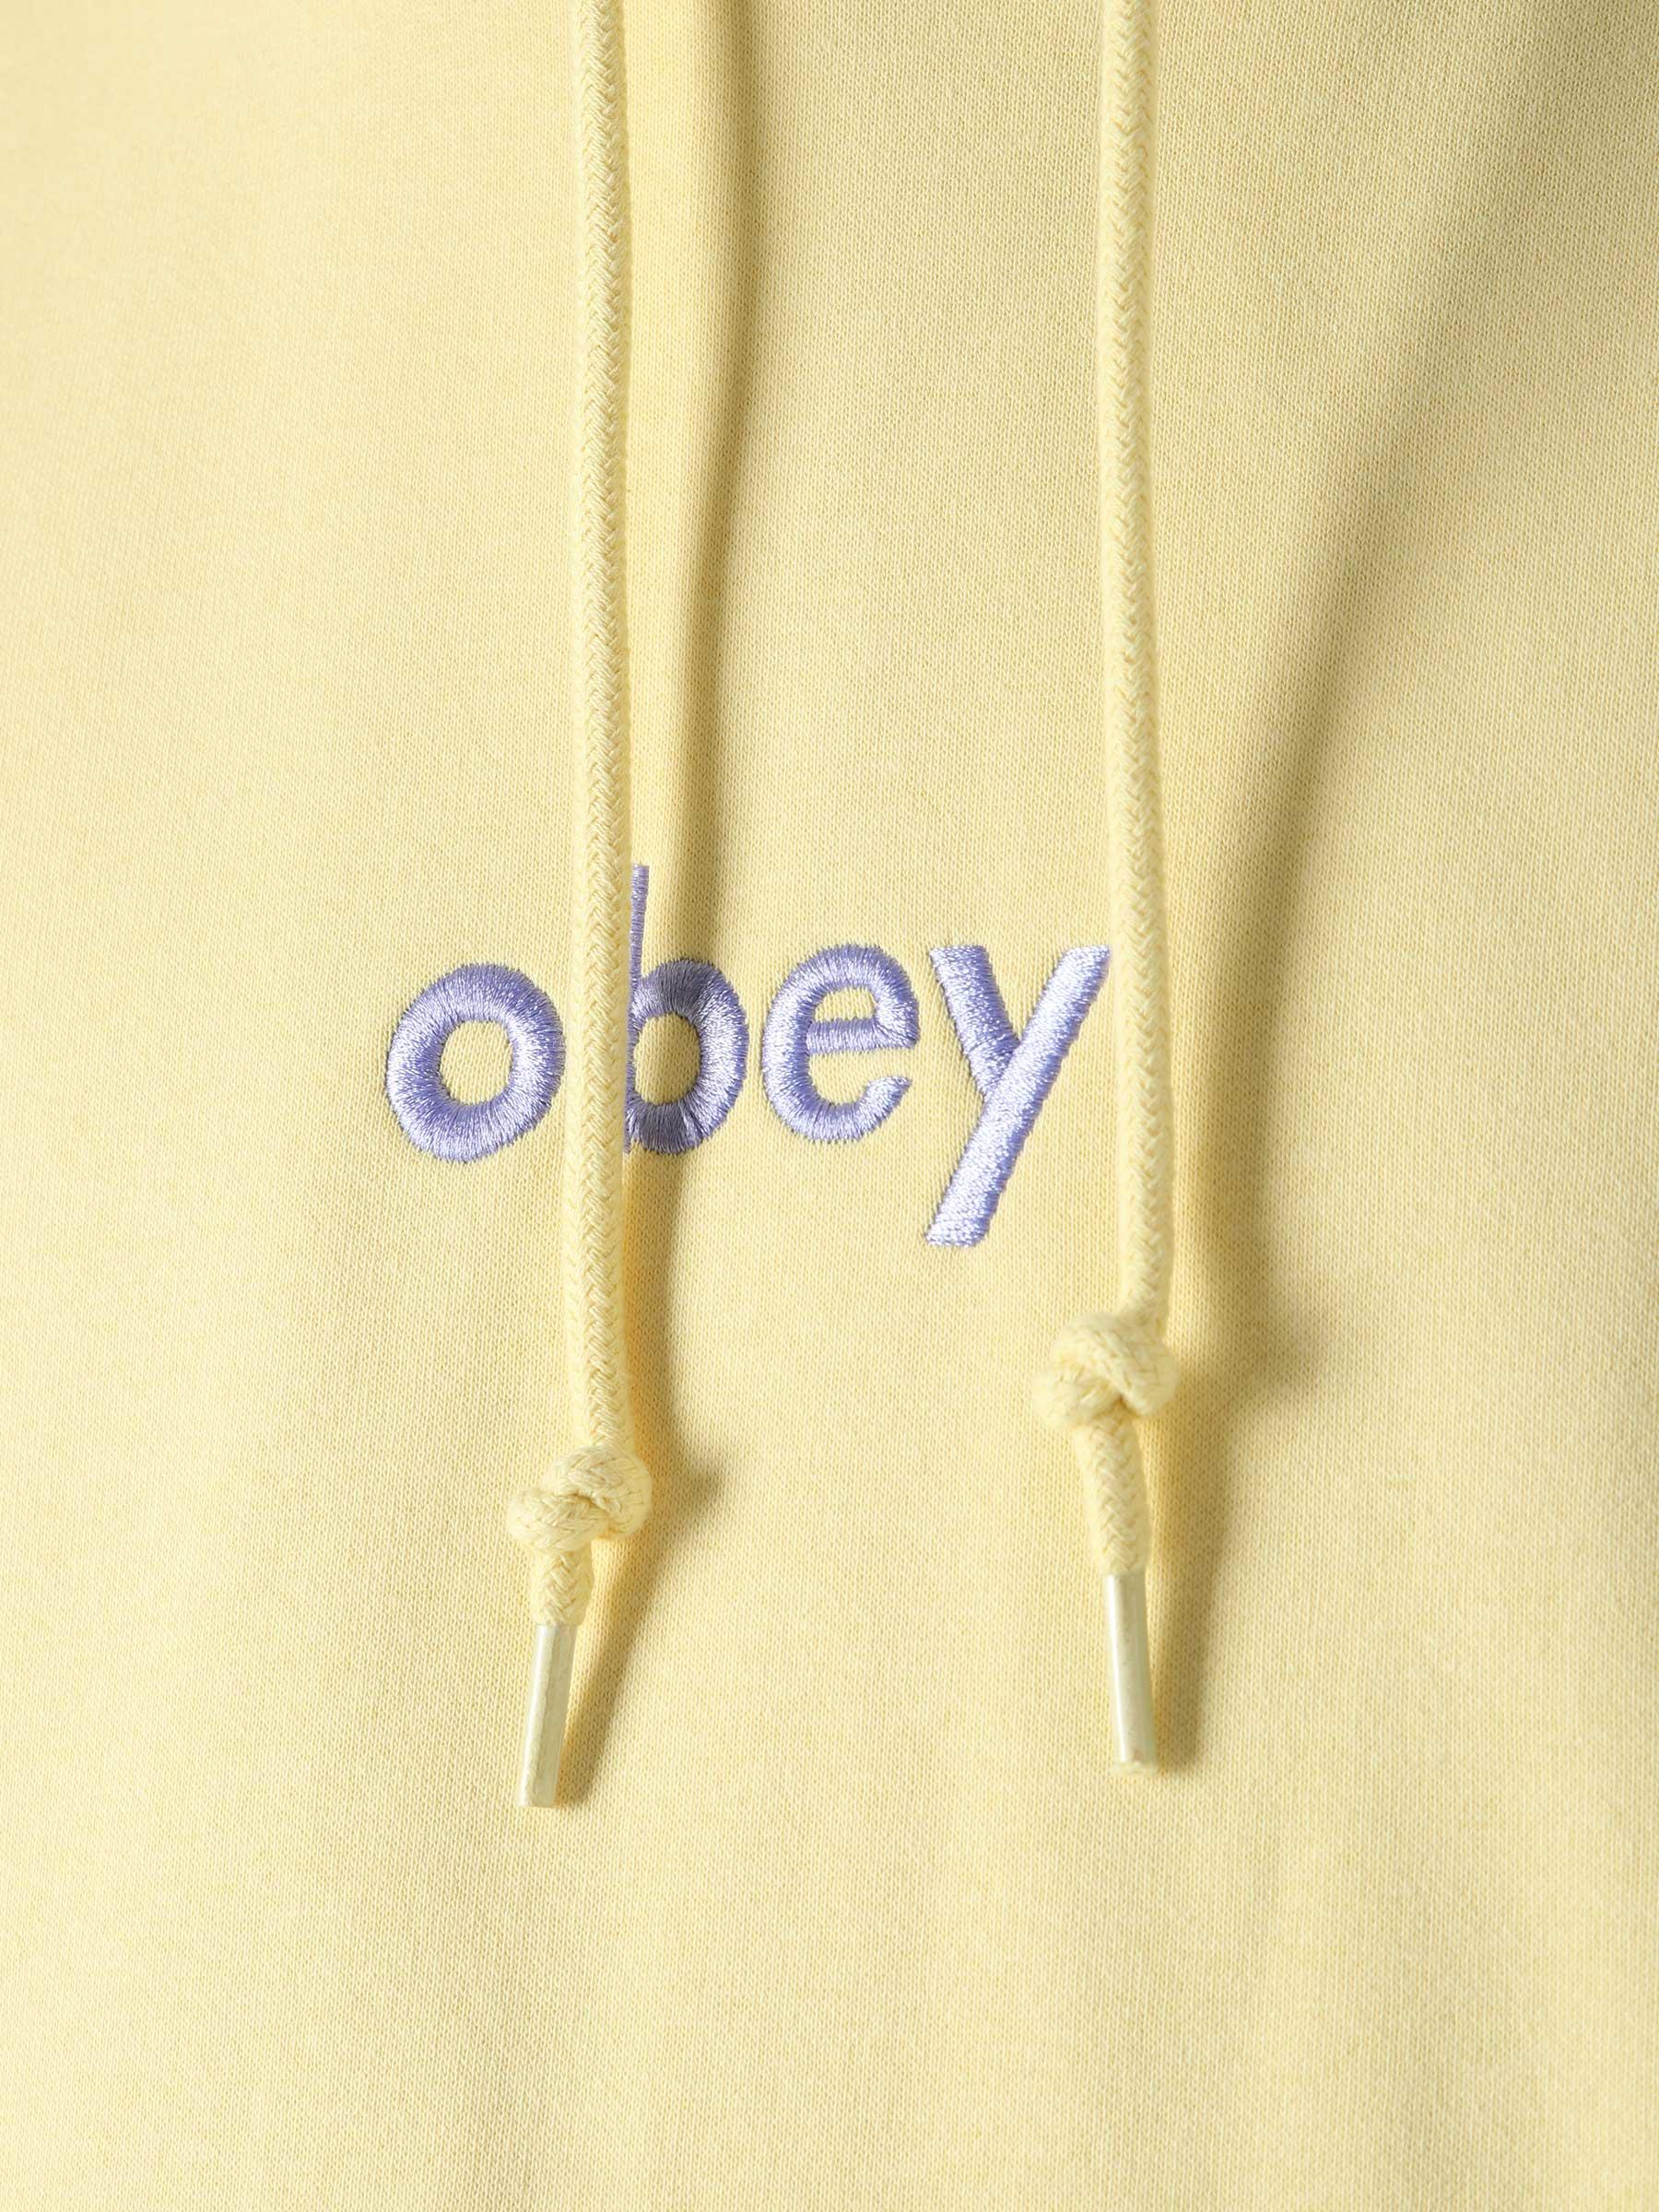 Obey Lowercase Hood Butter 112470162